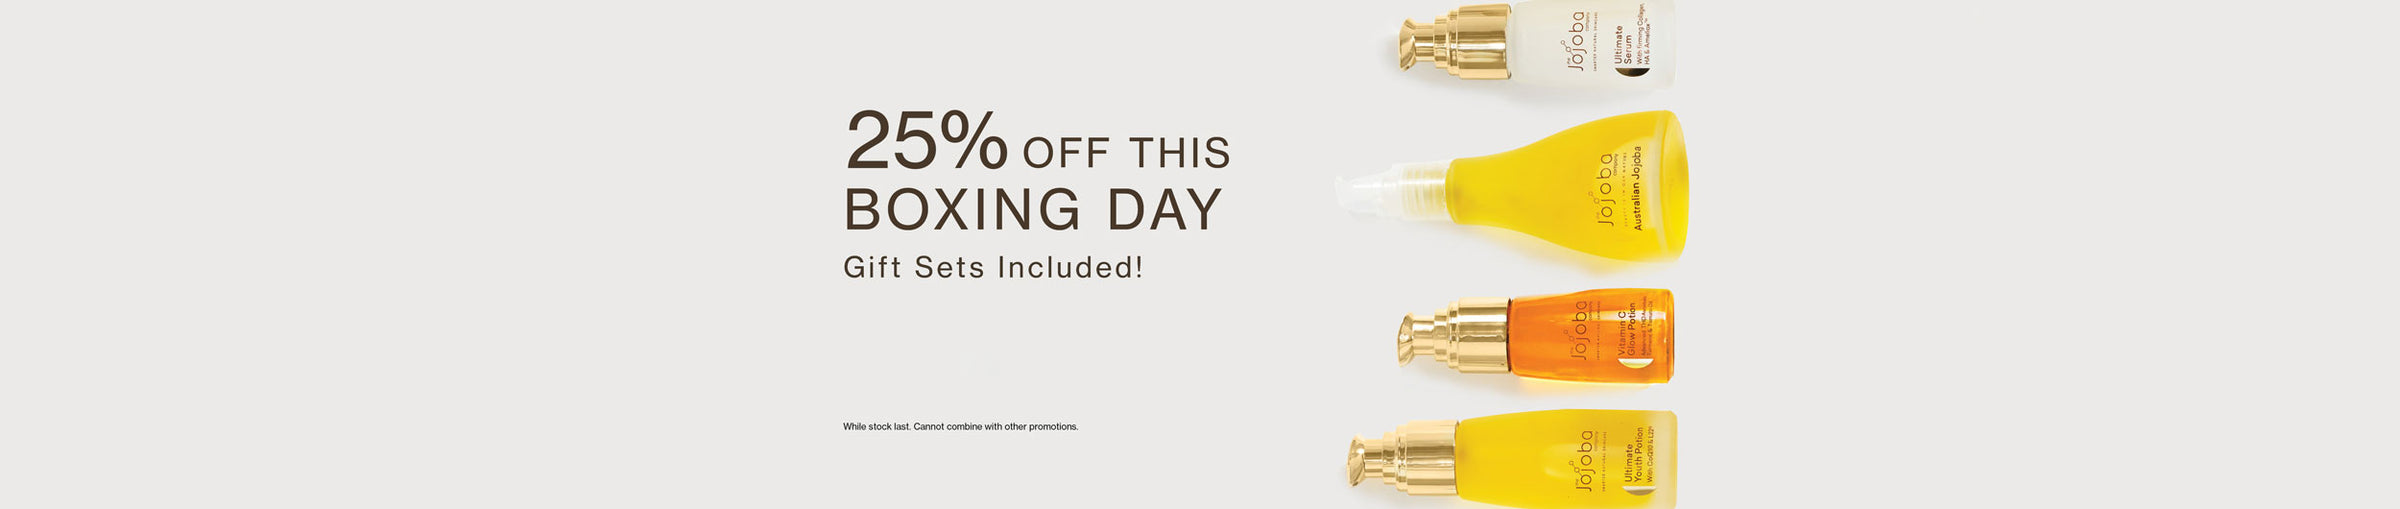 Boxing Day 25% off Everything